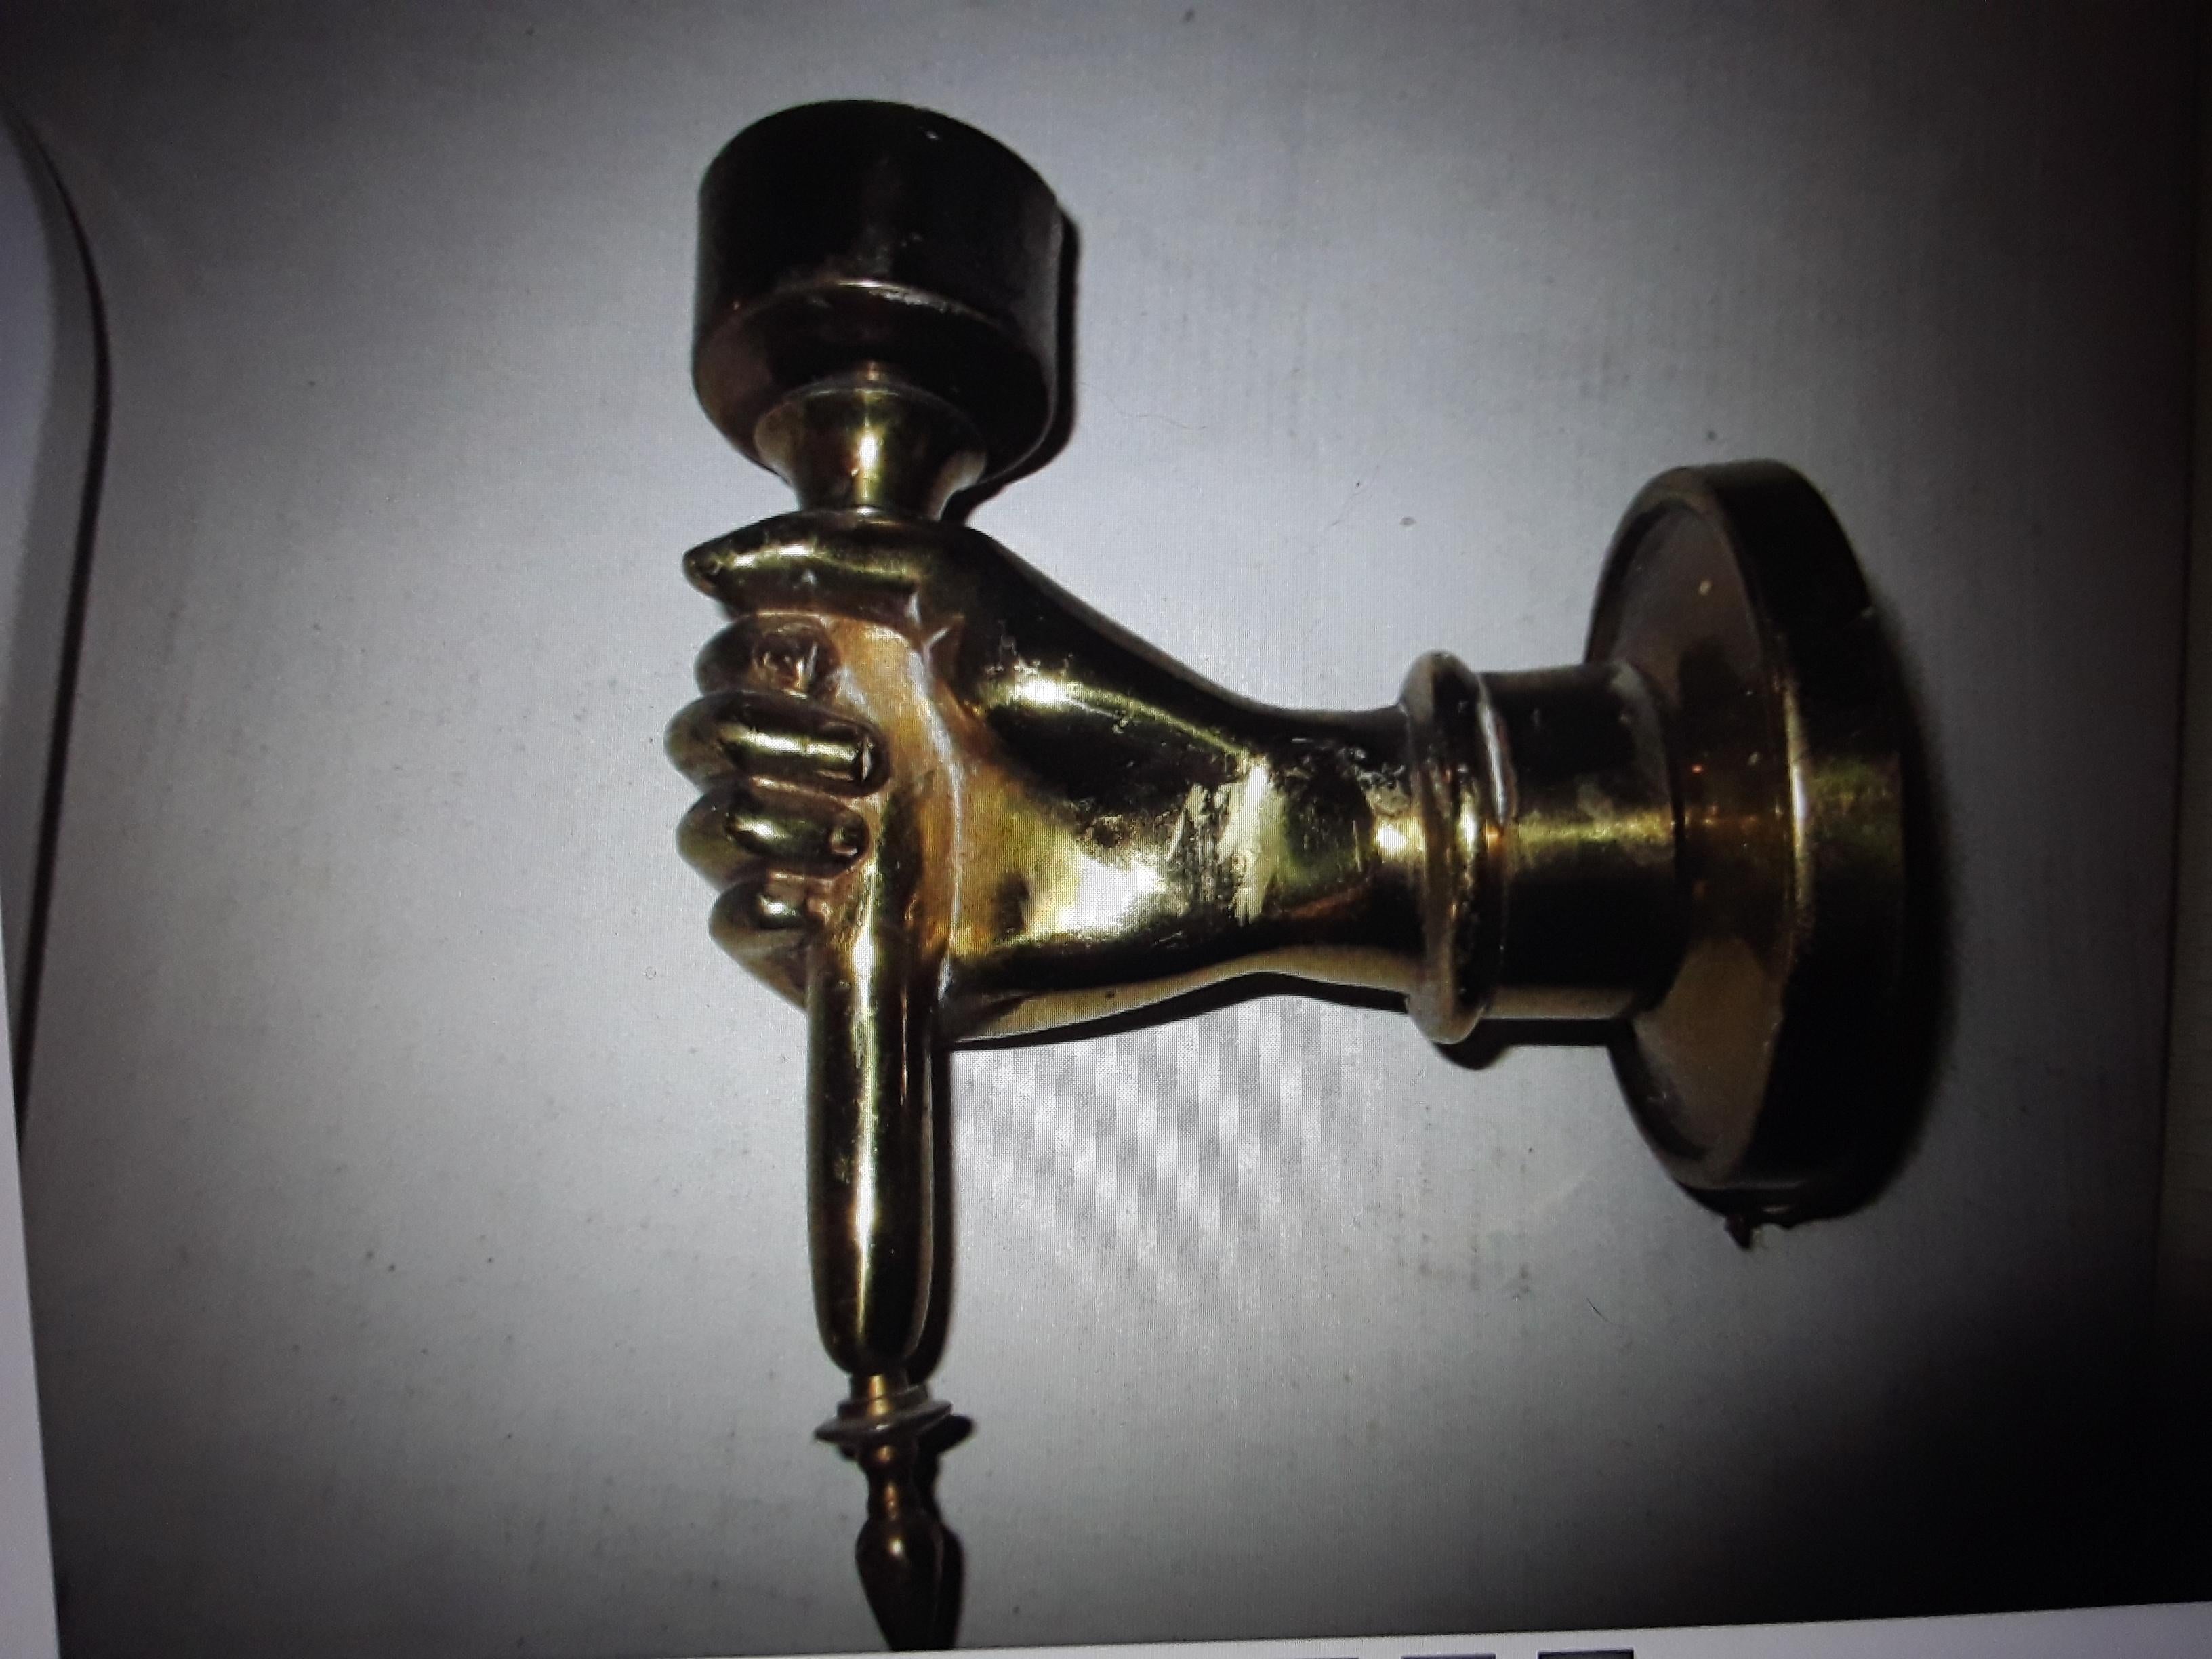 1930's French Art Deco Gilt Bronze Hand/ Fist Holding Towch Wall Sconce. Very high quality casting.